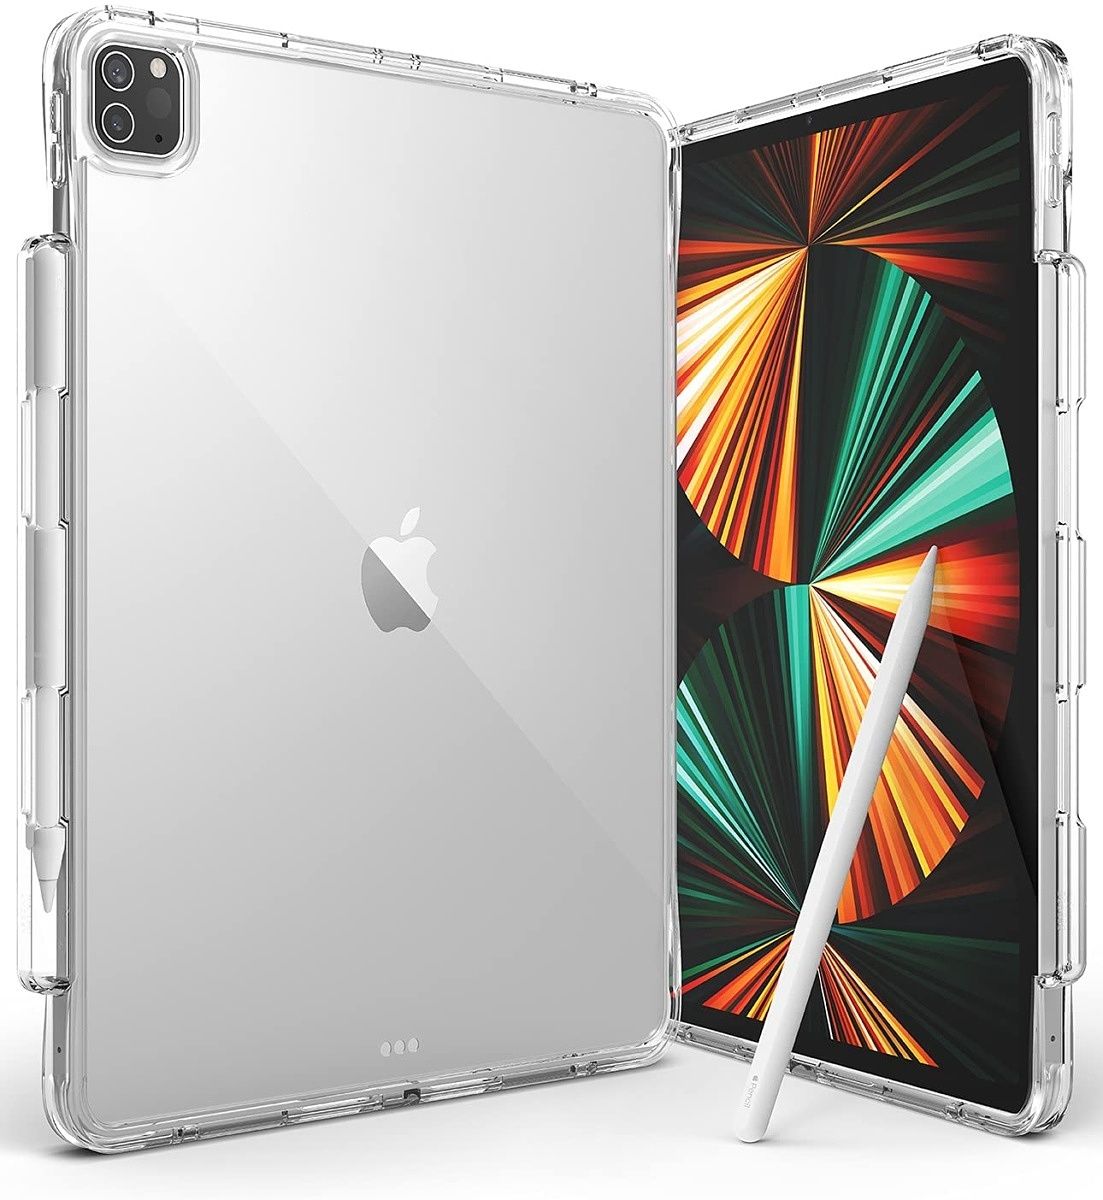 The Ringke Fusion Plus case comes with a Double Air Pocket technology frame that promises to provide twice the protection than regular cases. It's made of TPU, and includes an Apple Pencil holder. Moreover, there are lanyard holes to attach hand or neck straps.